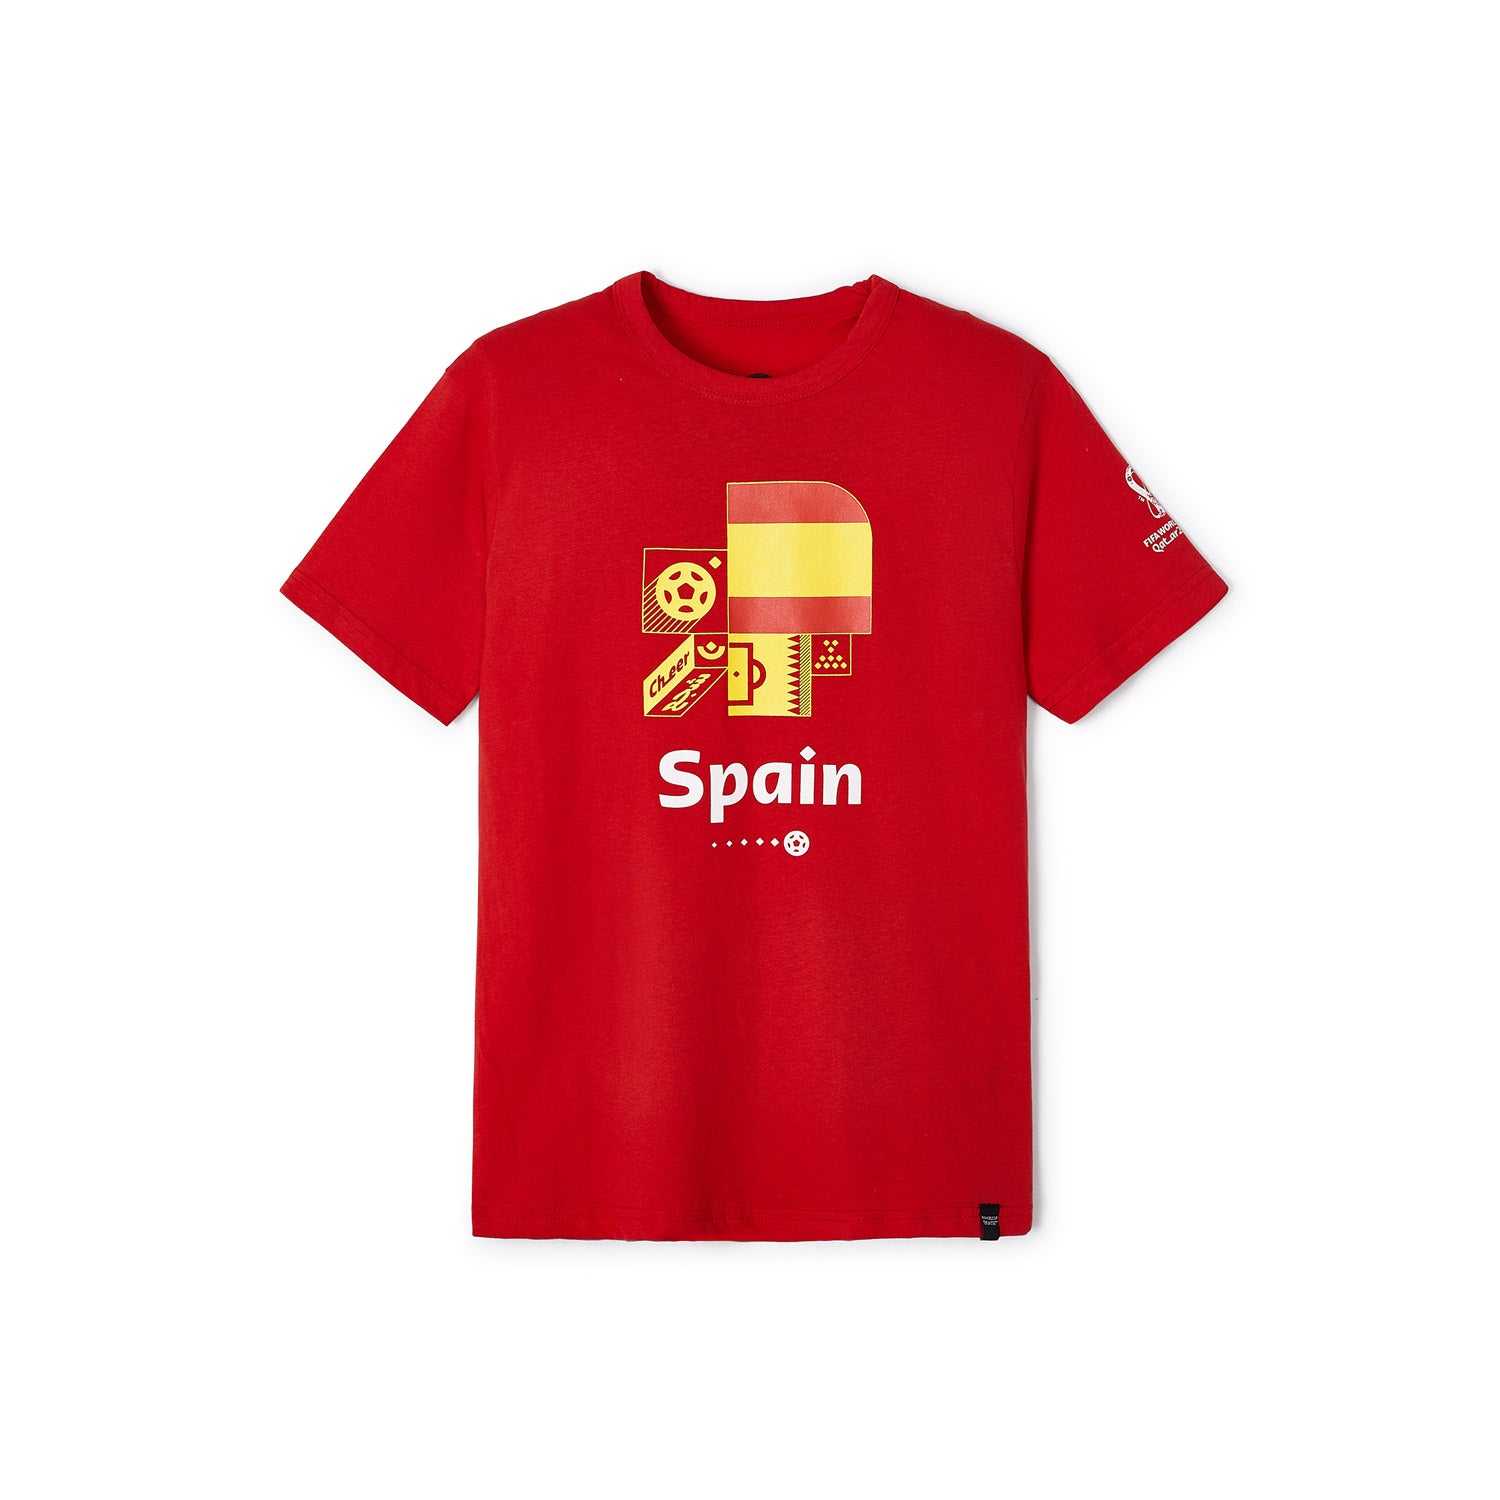 2022 World Cup Spain Red T-Shirt - Youth